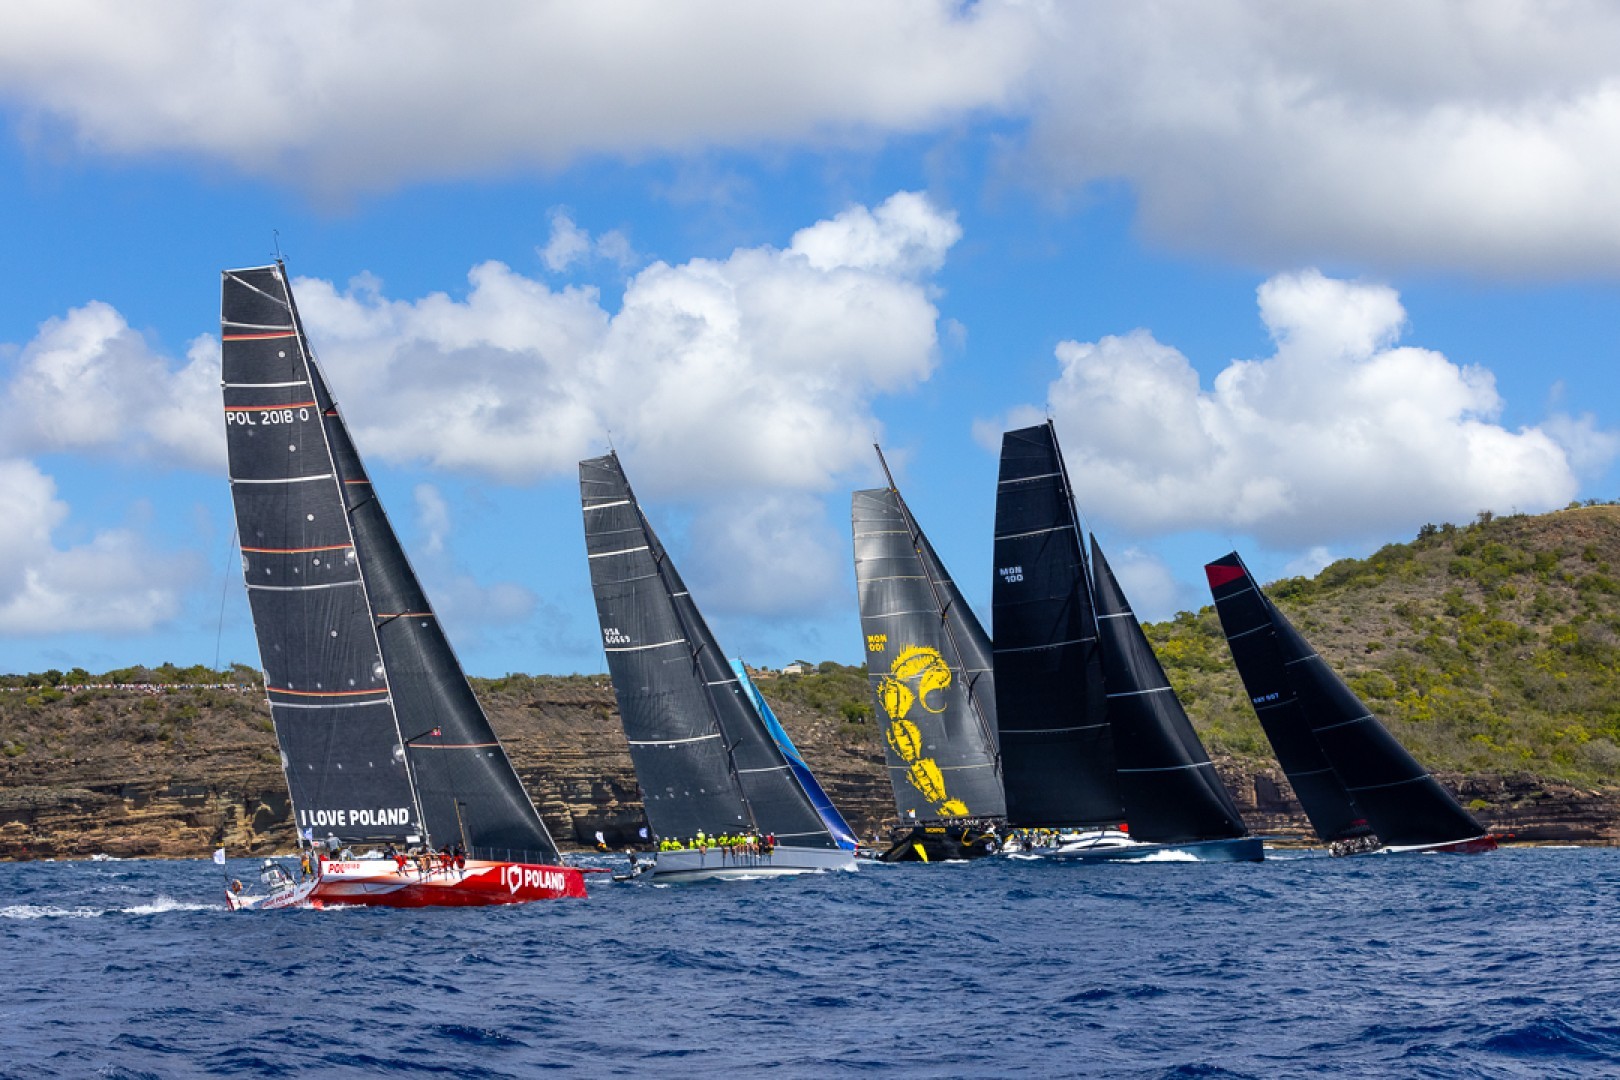 A spectacular start in Antigua for the 13th RORC Caribbean 600 - Seventy-four teams started the Royal Ocean Racing Club's 600-mile race around 11 Caribbean islands